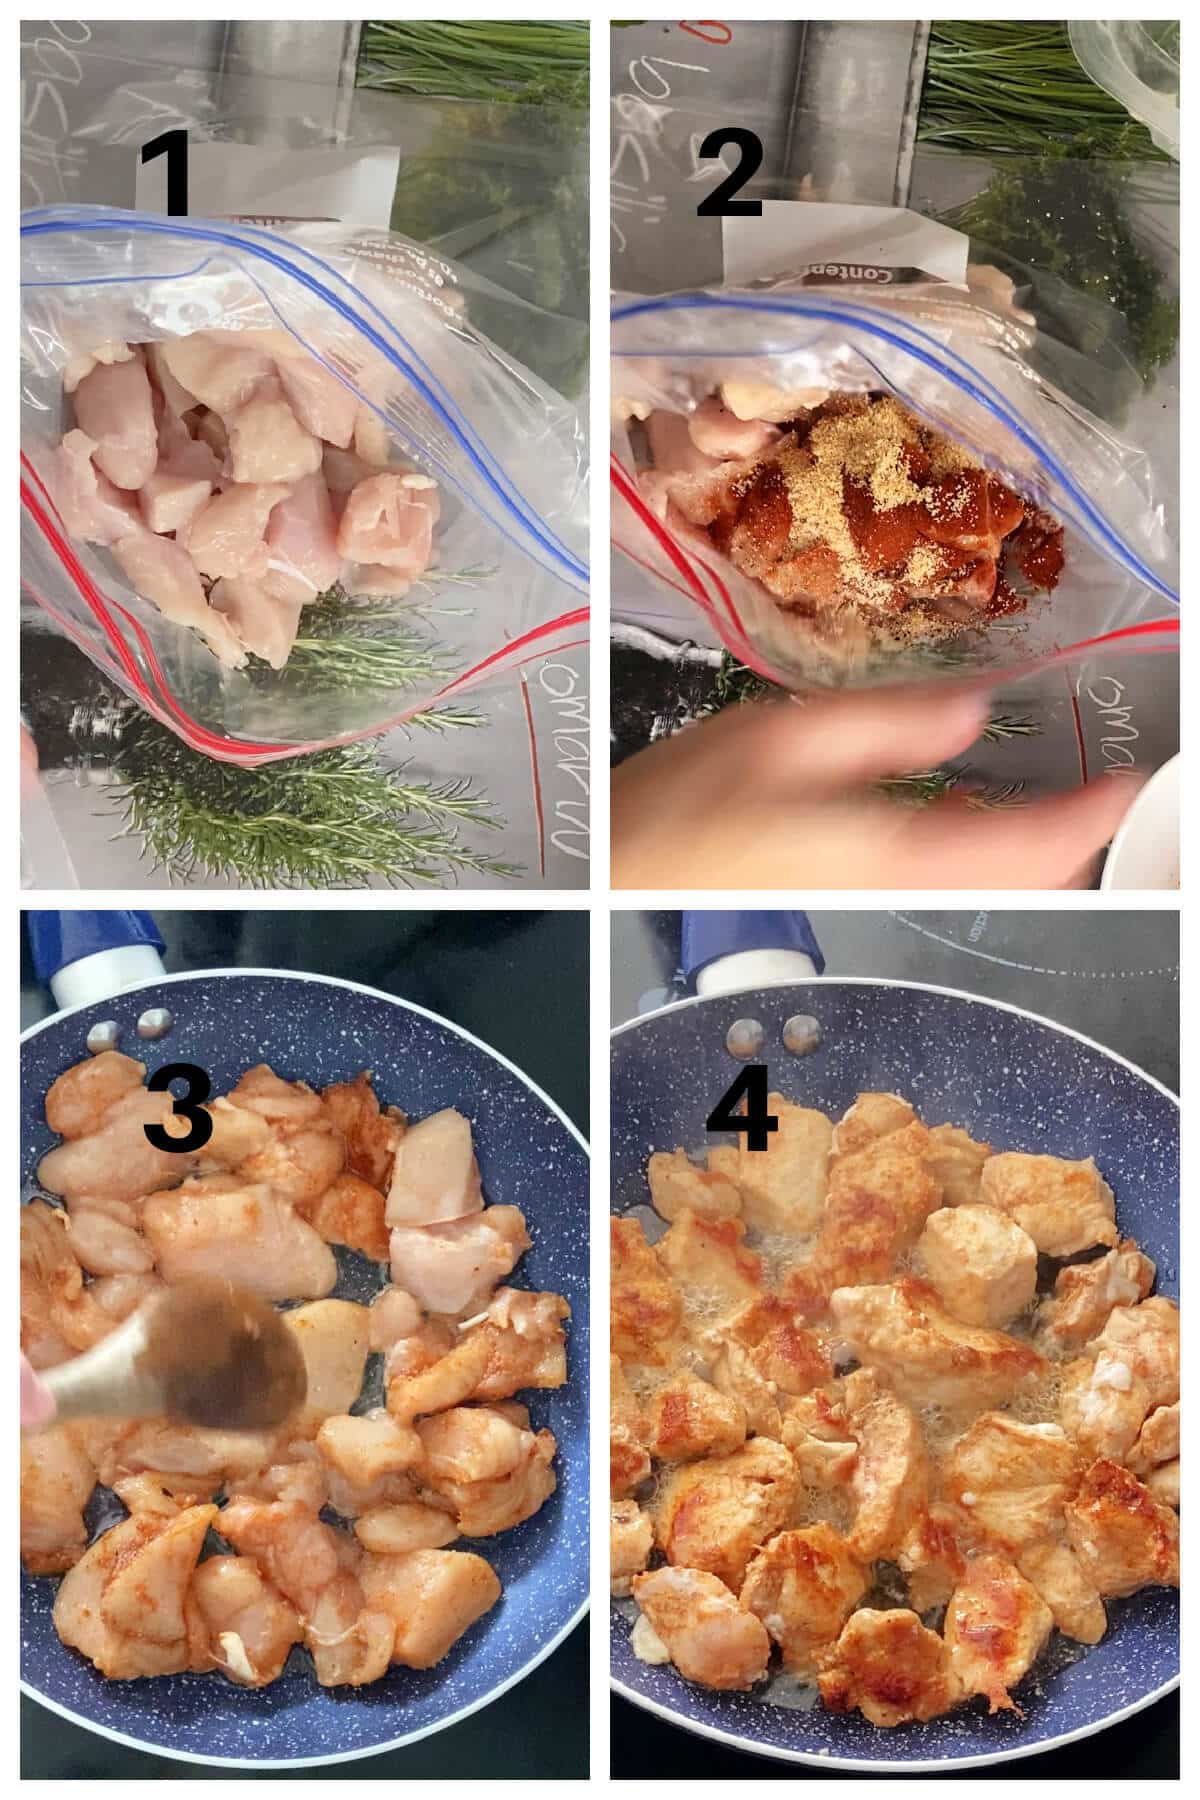 Collage of 4 photos to show how to cook chicken.